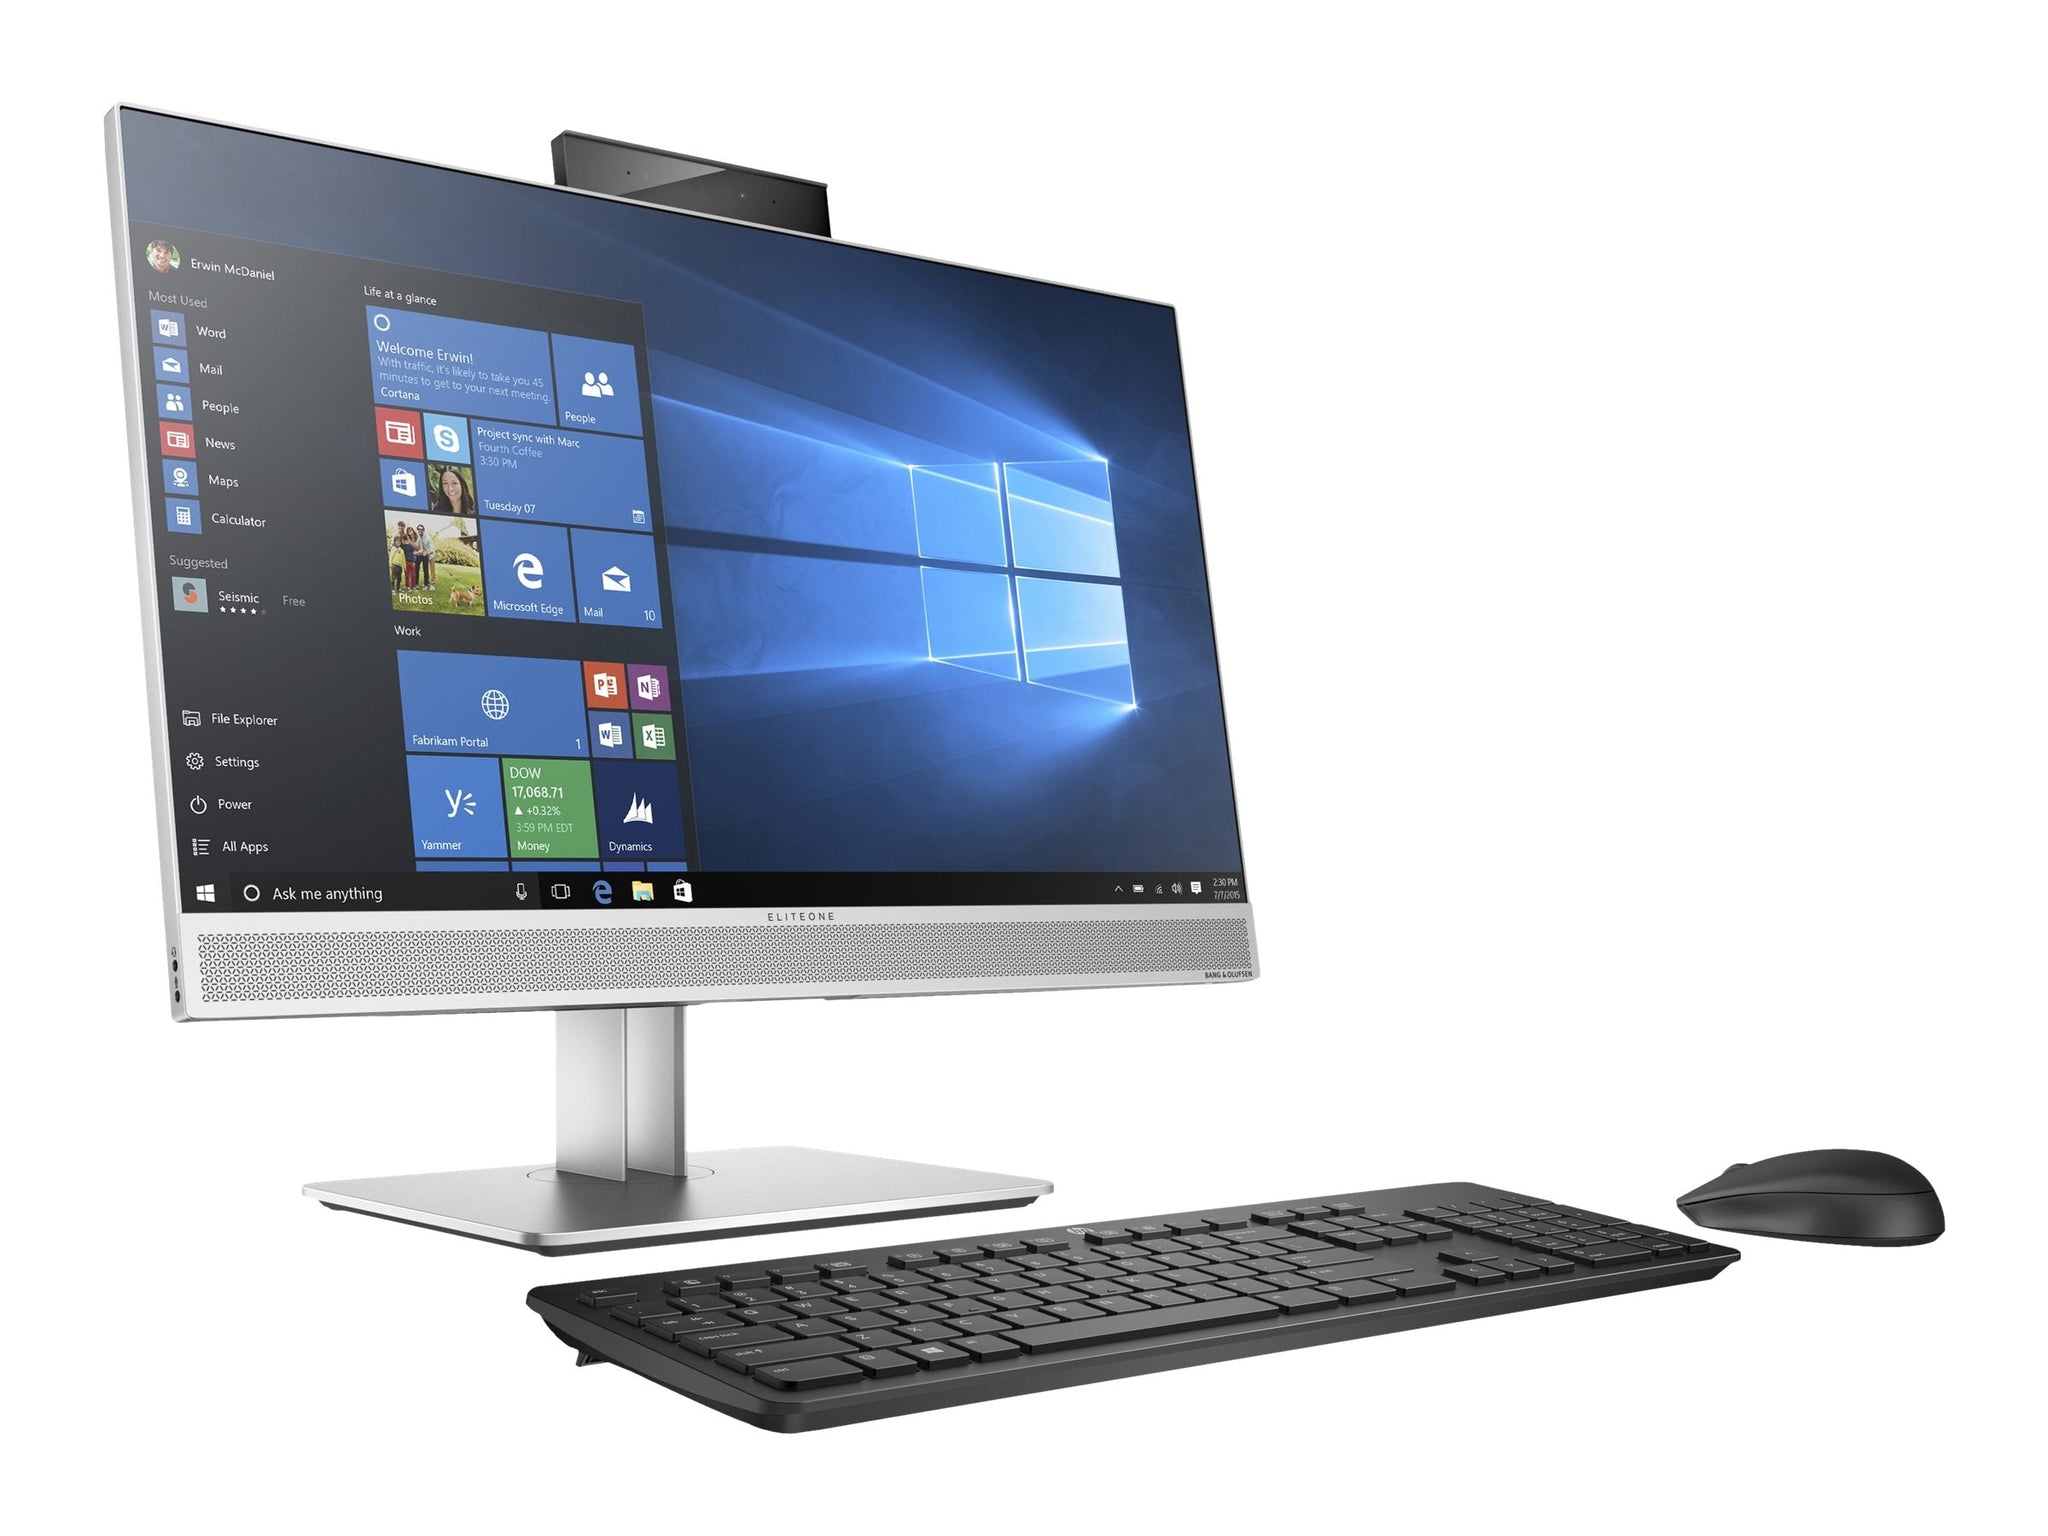 HP EliteDesk 800 G3 23.8-inch NonTouch All-in-One PC - I5-7500 8GB 1TB W10P Refurbished